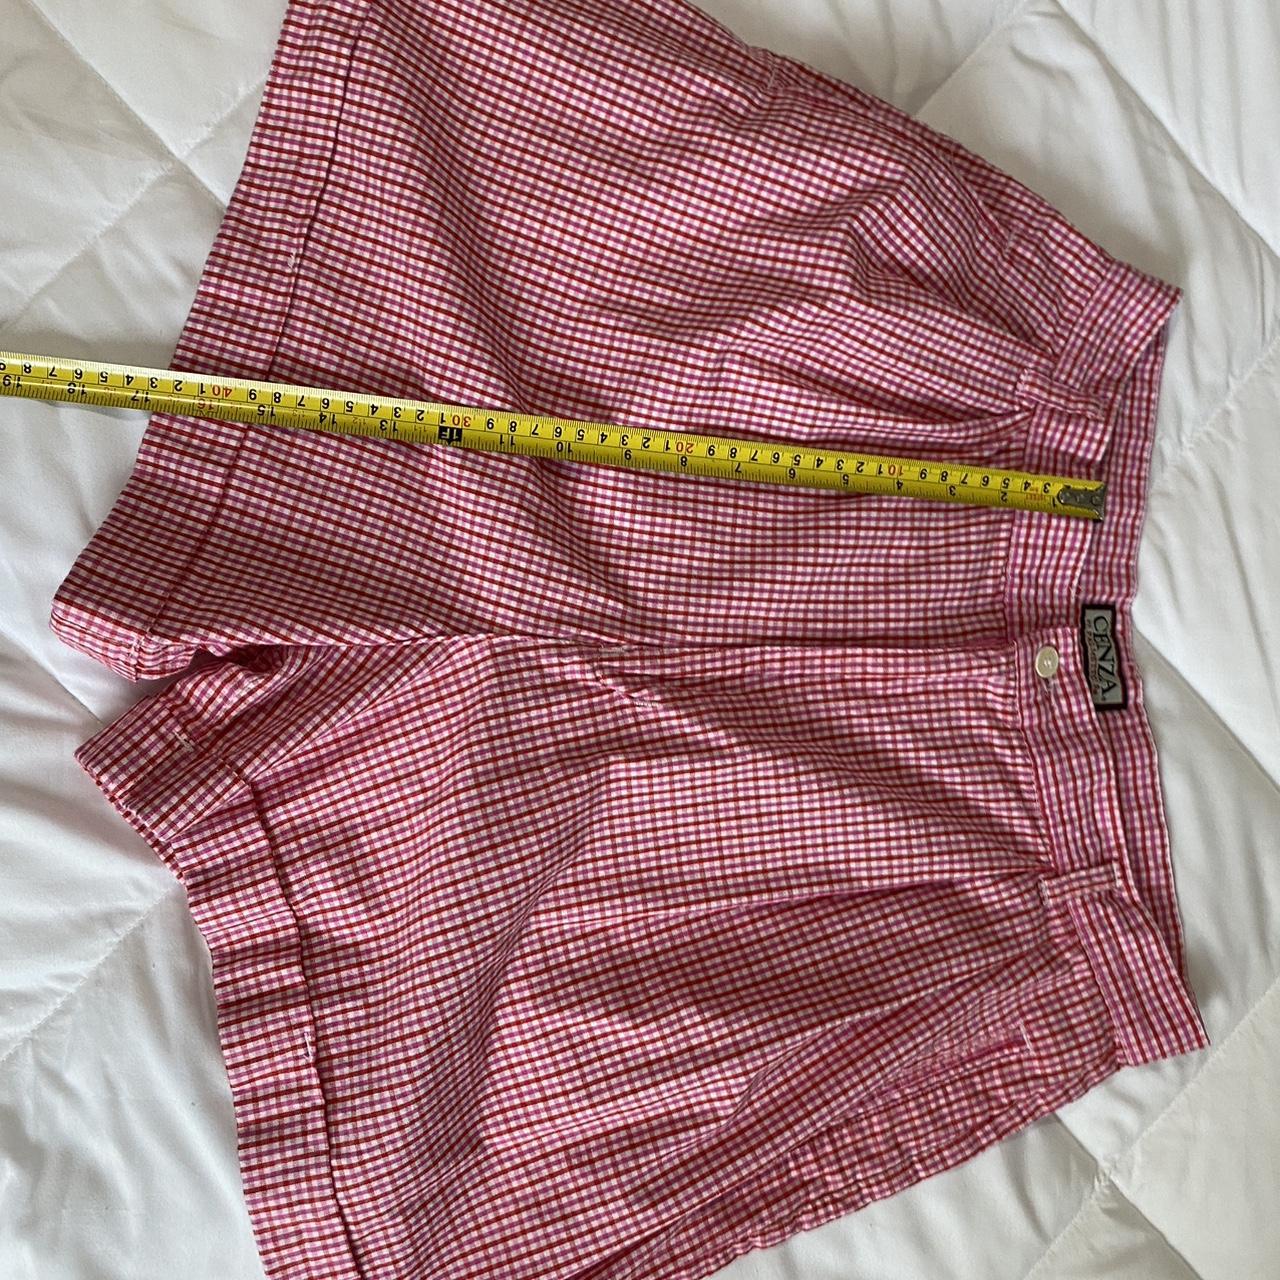 Cute gingham/plaid shorts with pleats 🍄 mom-jean... - Depop